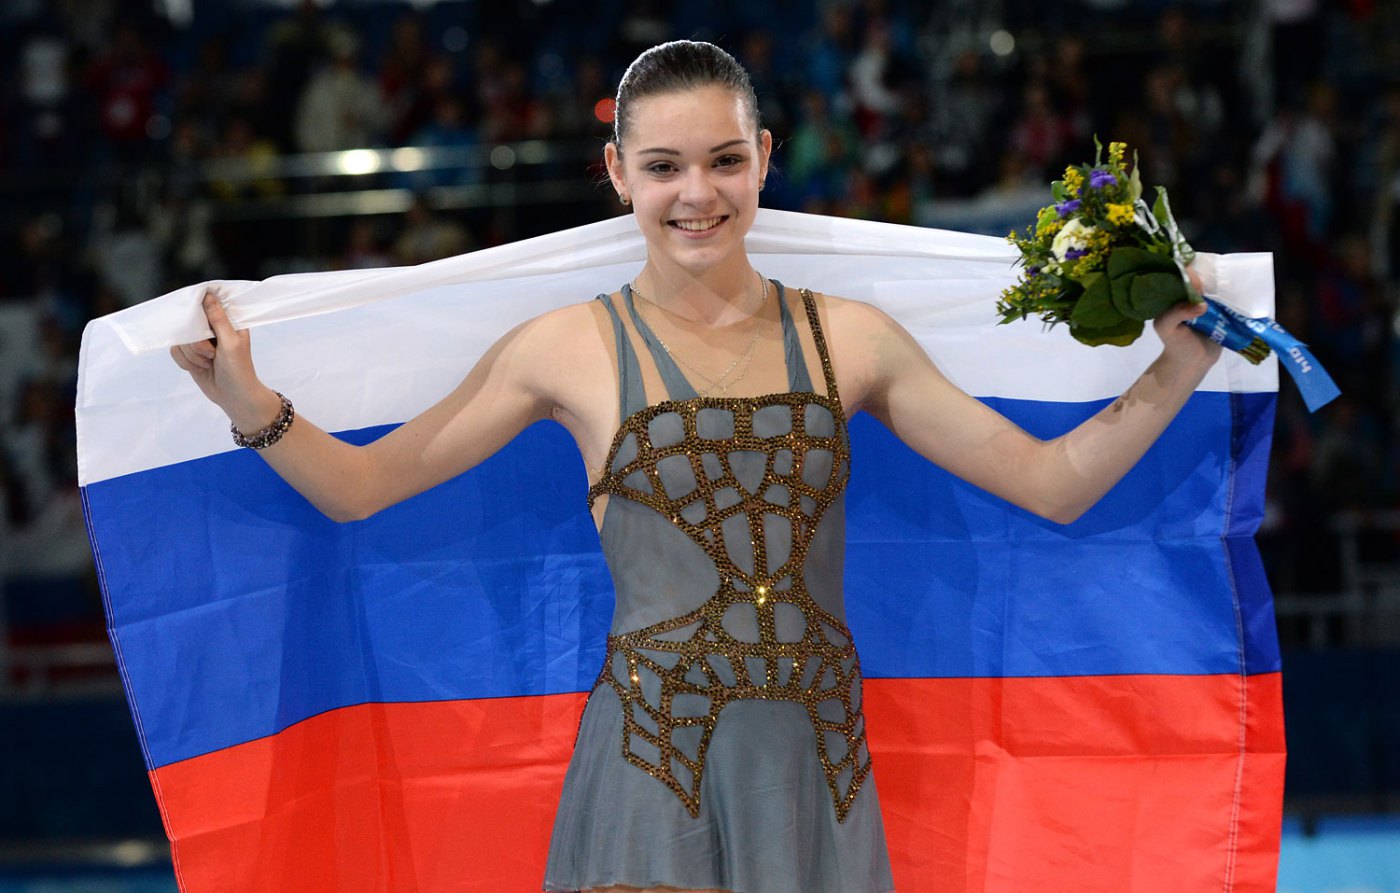 Russia's gold medalist Adelina Sotnikova celebrates during the Women's Figure Skating Flower Ceremony at the Iceberg Skating Palace during the Sochi Winter Olympics on February 20, 2014. (Yuri Kadobnov&mdash;AFP/Getty Images)